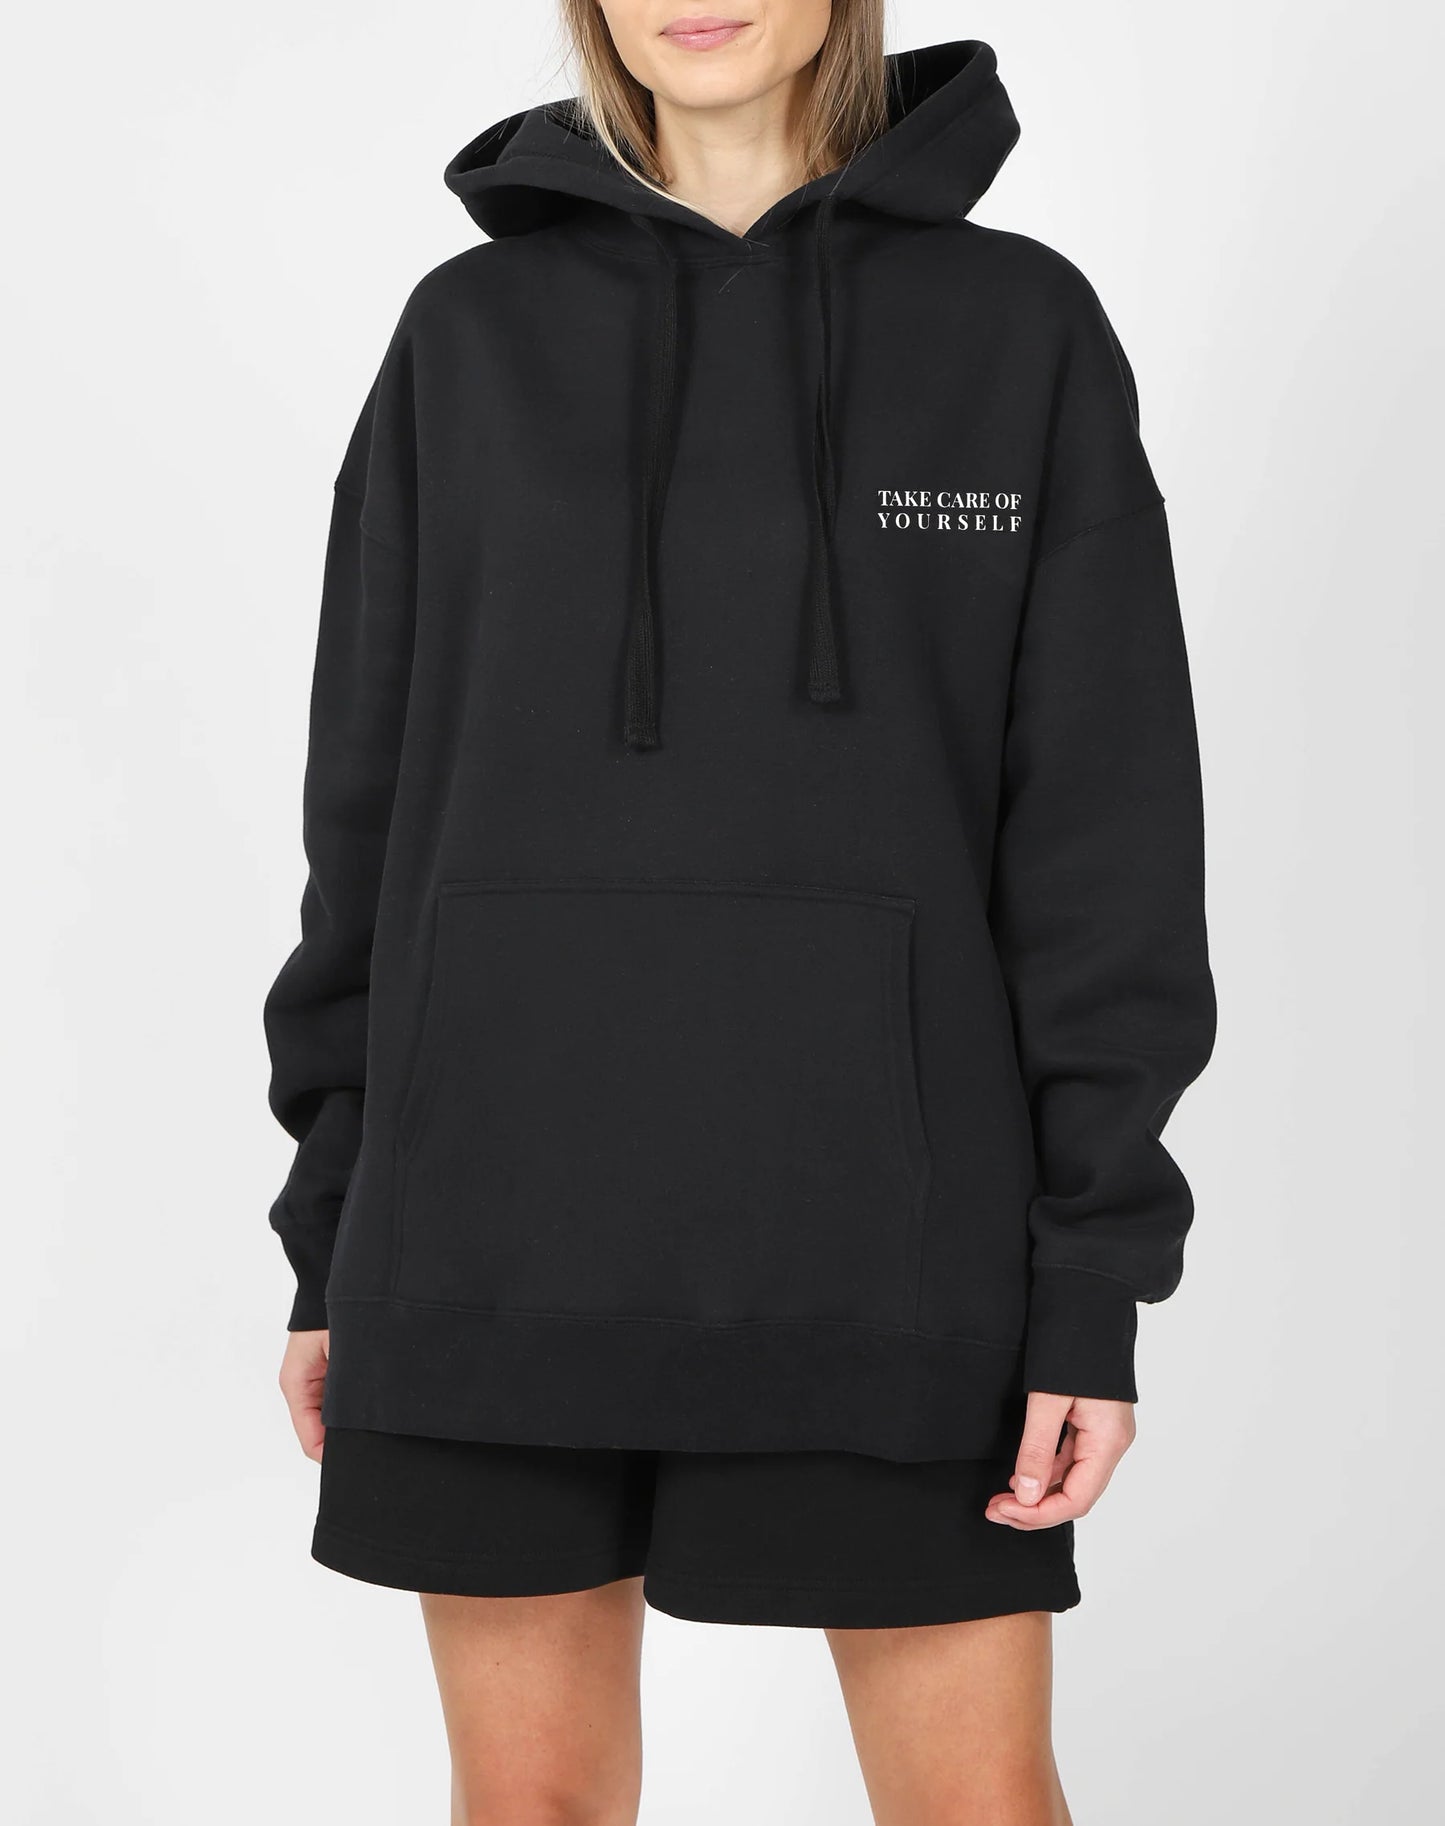 The "TAKE CARE OF EACH OTHER" Big Sister Hoodie Brunette The Label